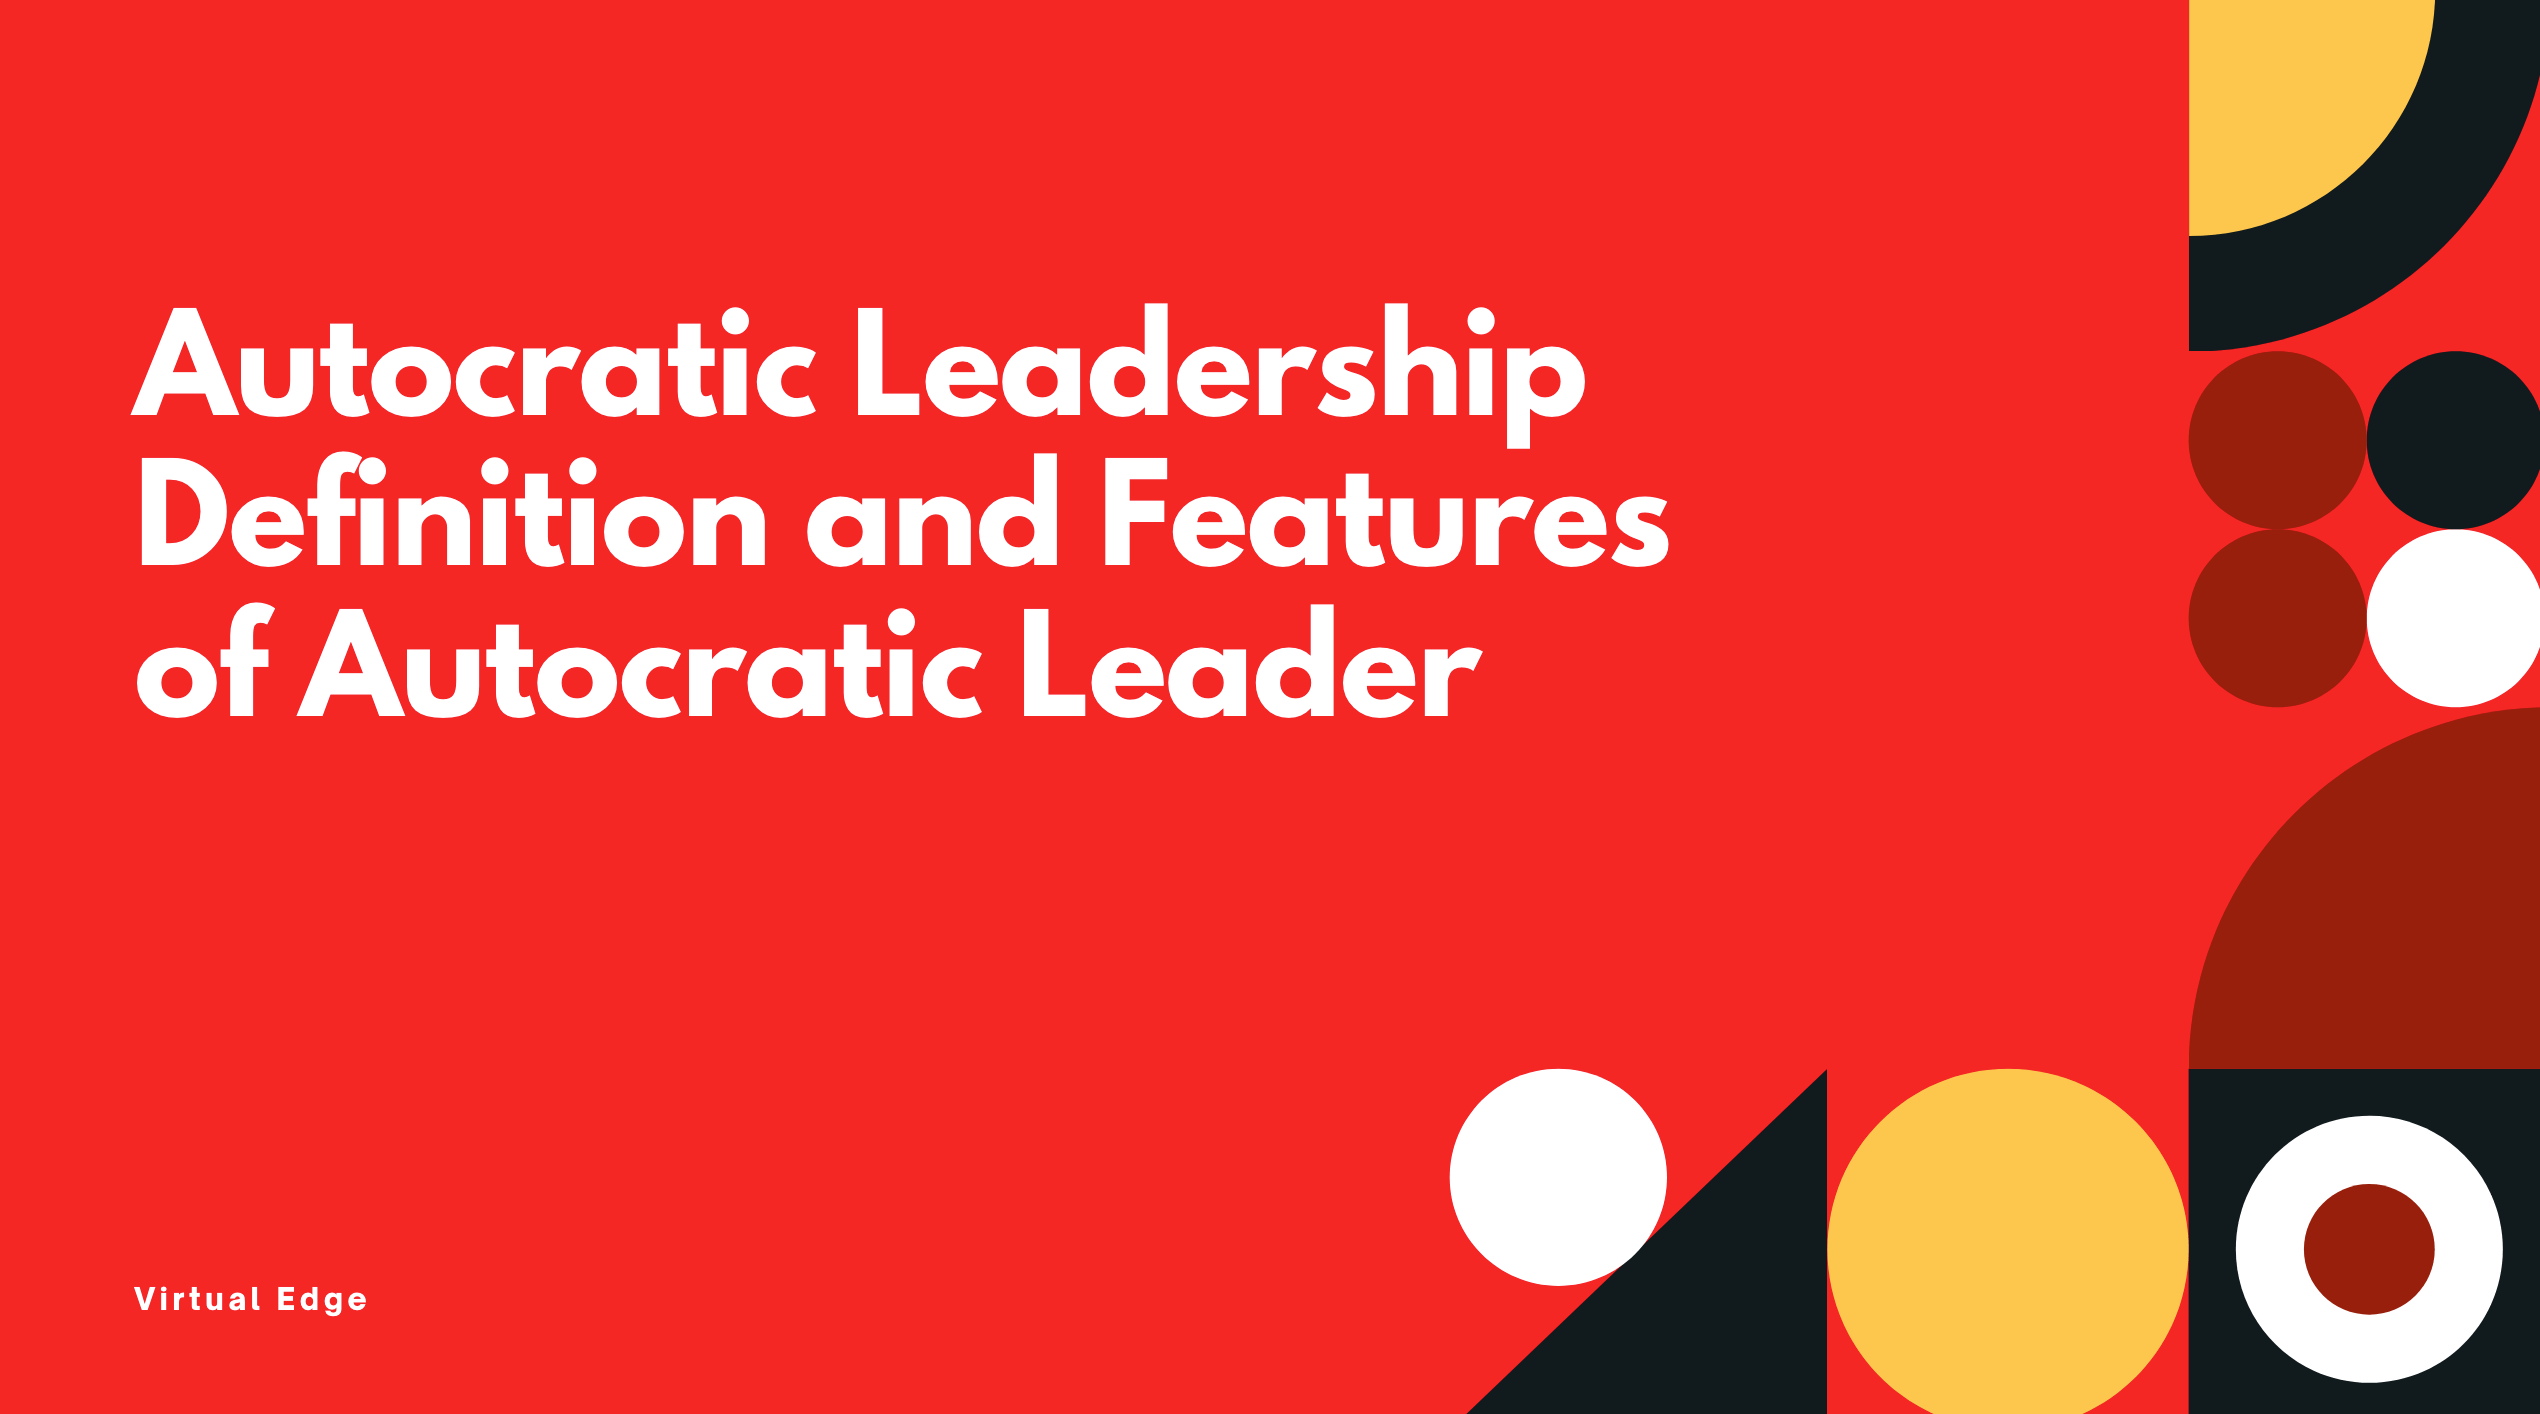 Autocratic Leadership Definition and Features of Autocratic Leader